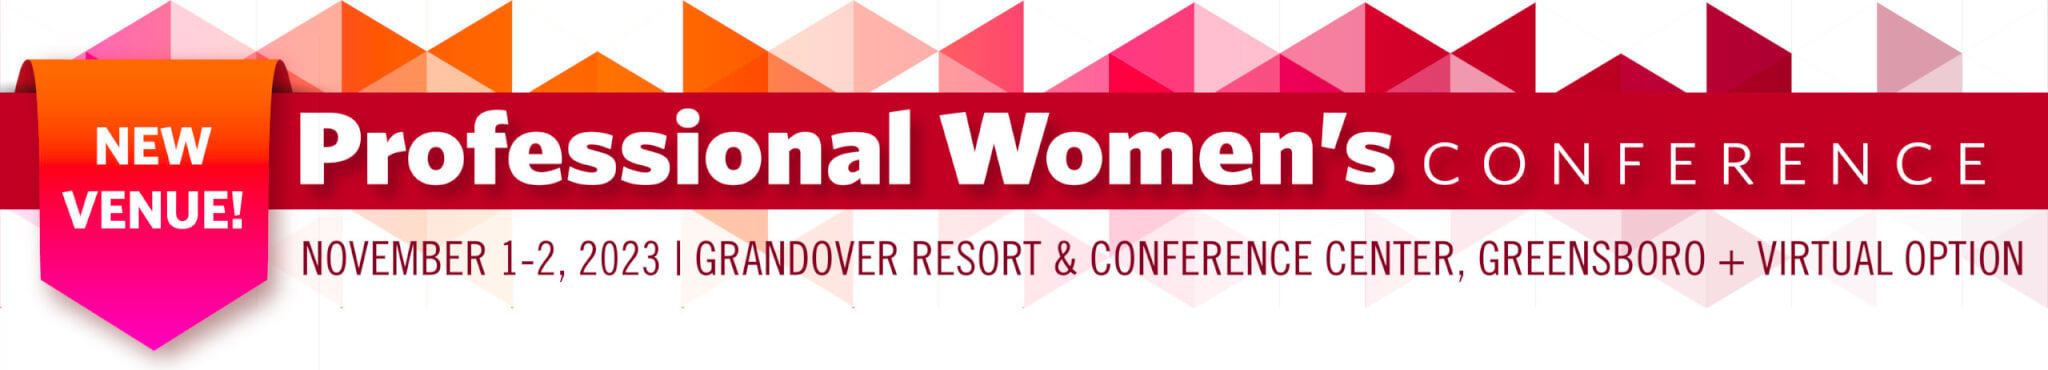 Professional Women's Conference Header